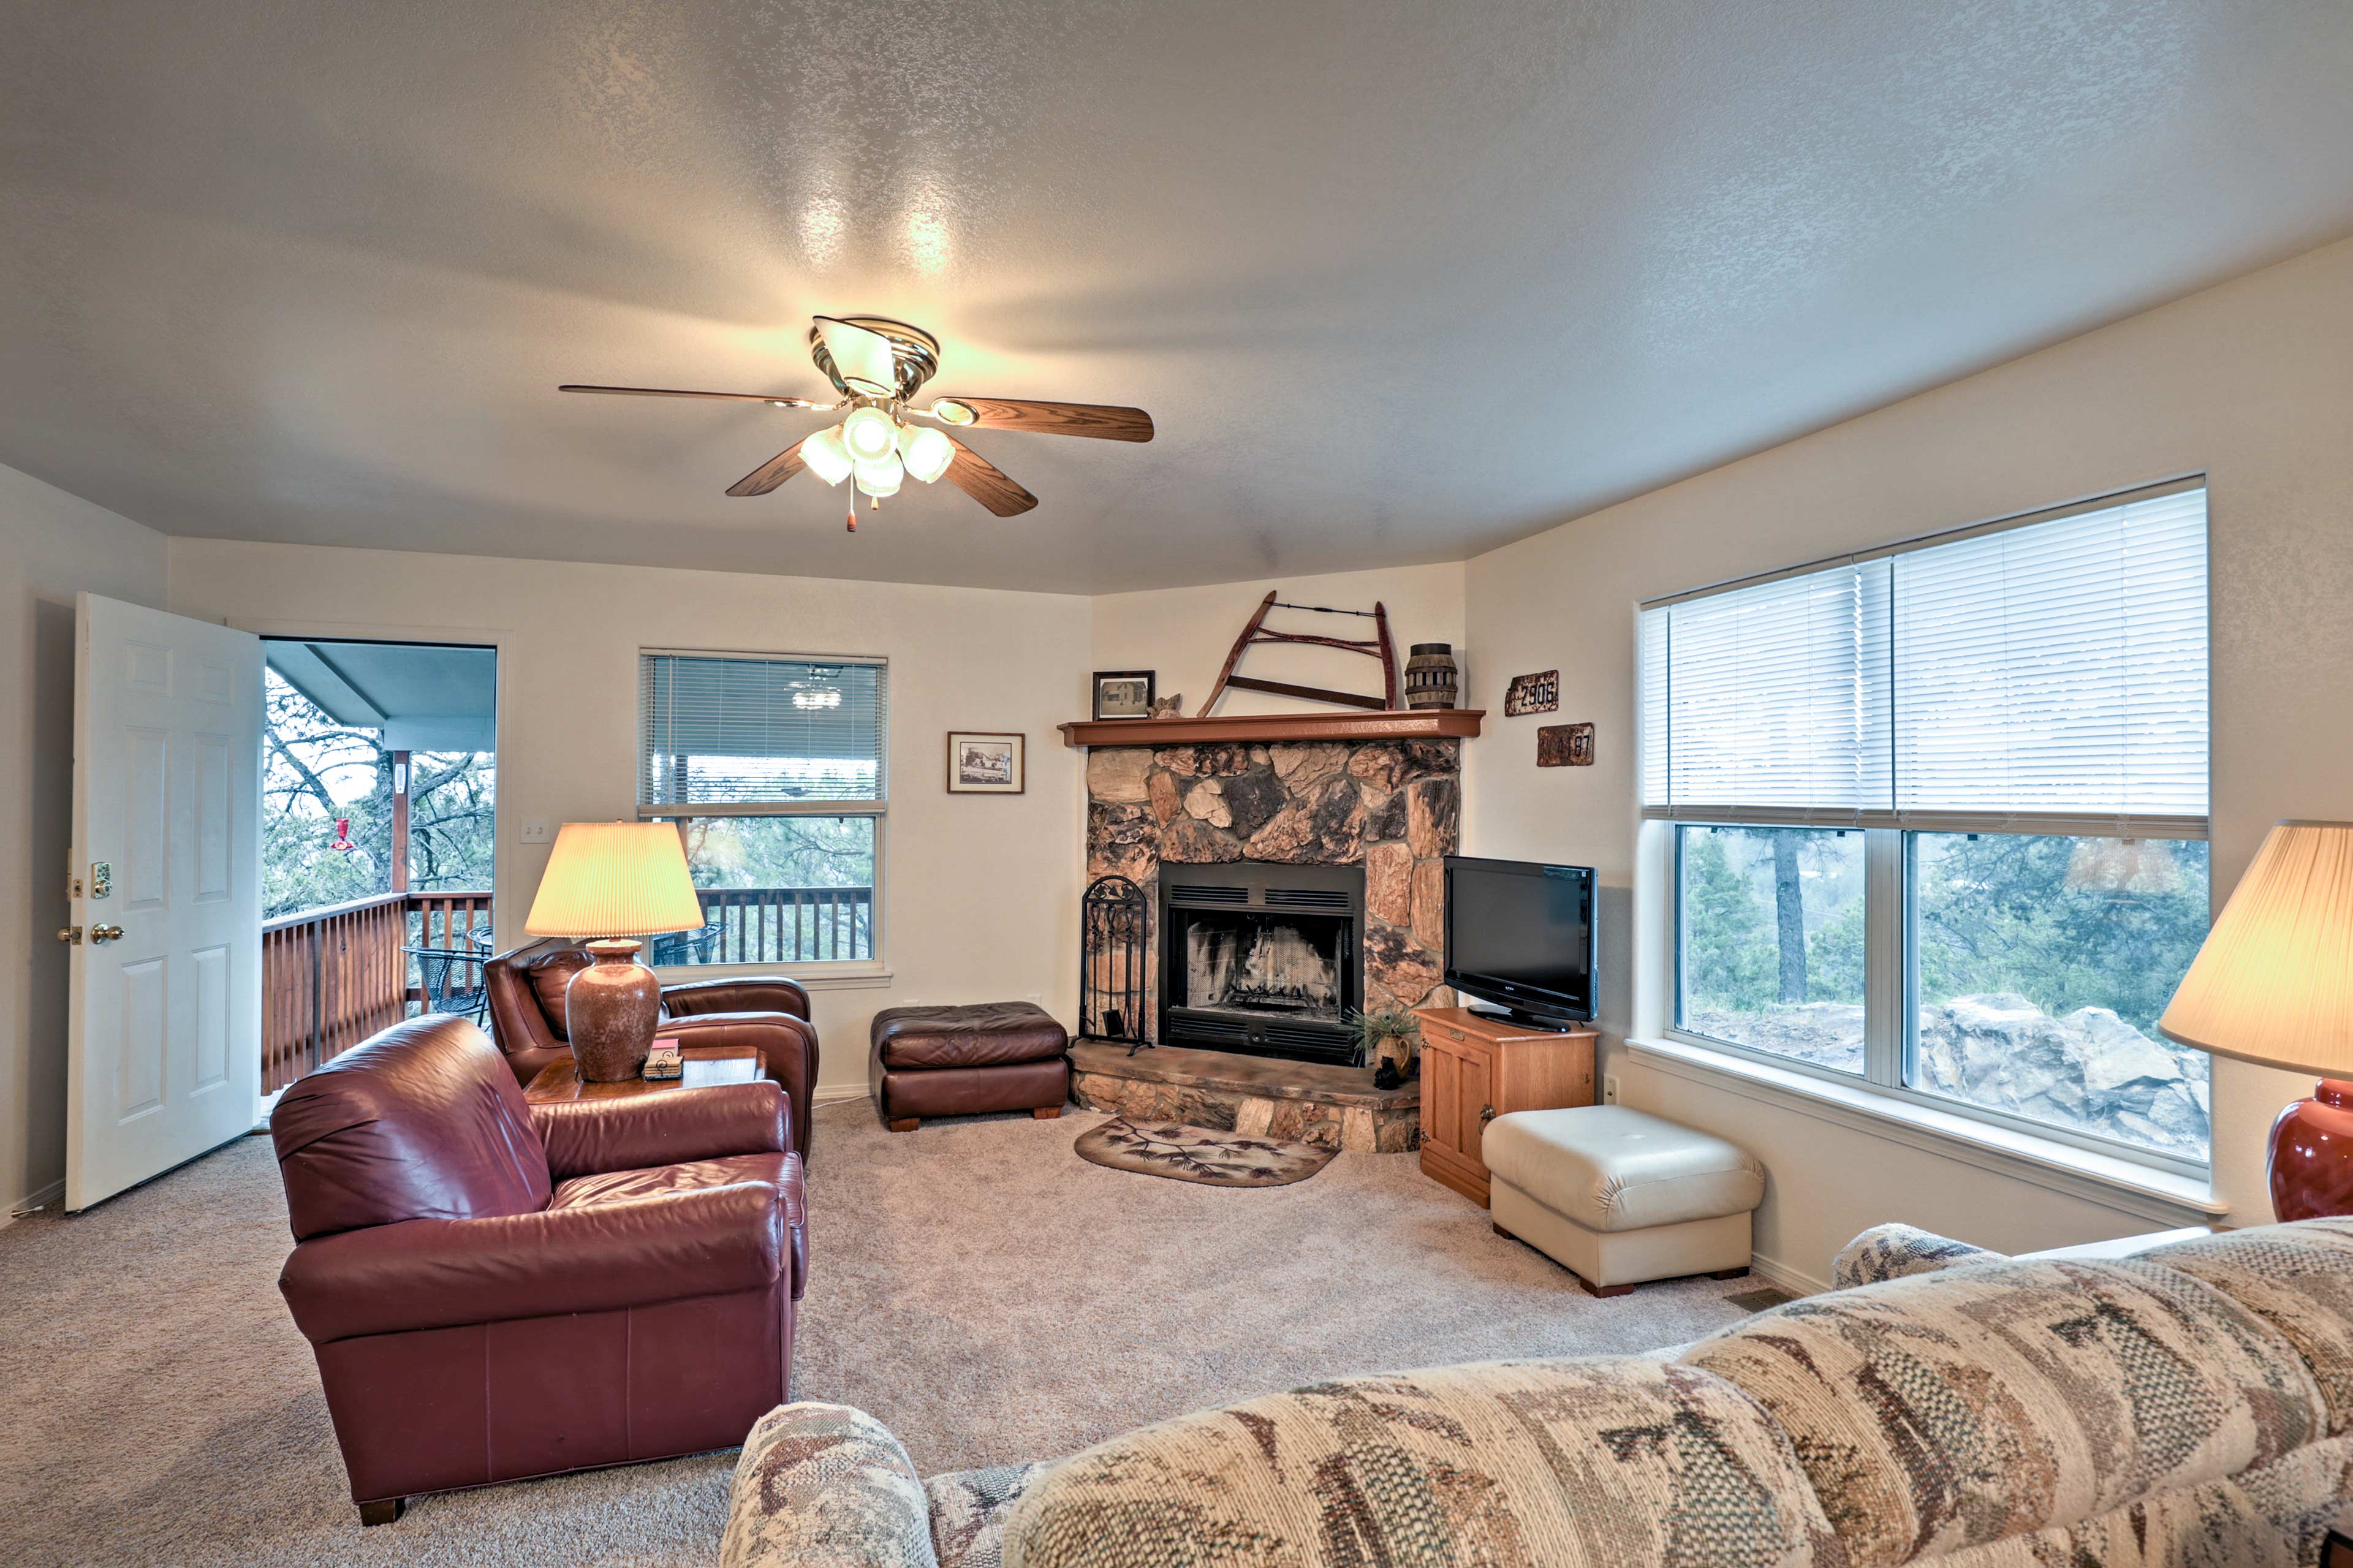 The cozy interior offers all the comforts of home!